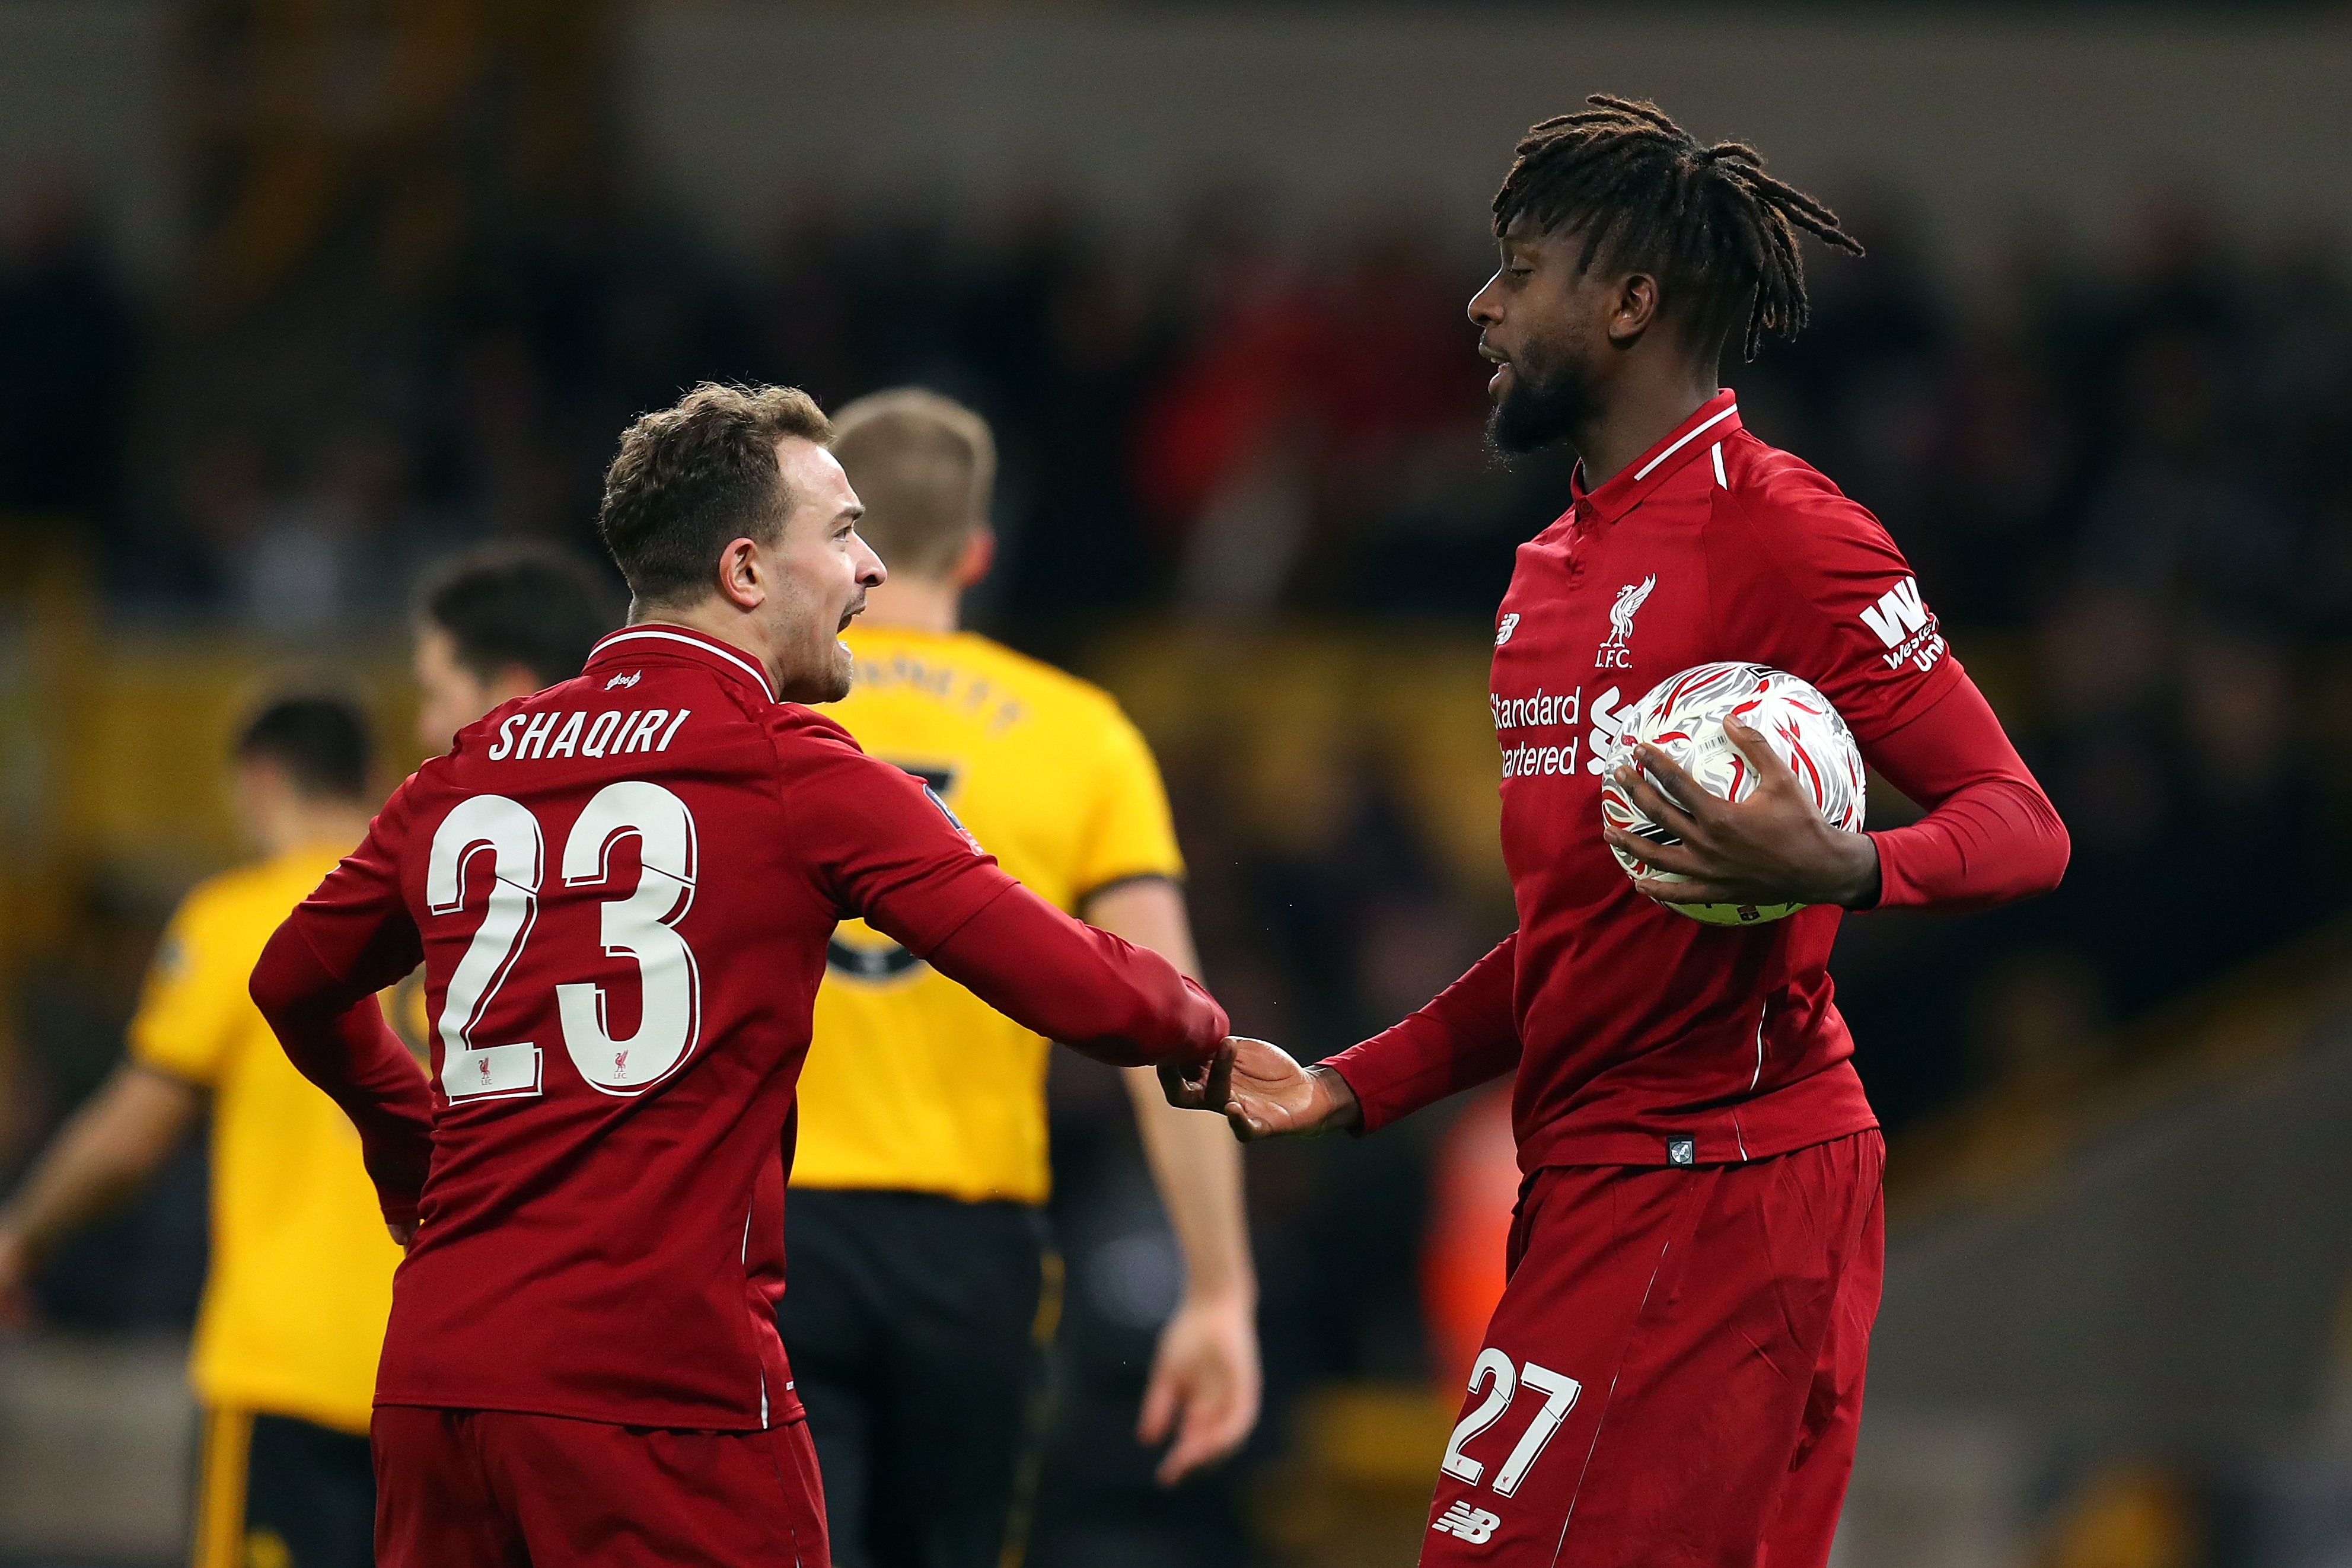 Origi has been selected ahead of Shaqiri in recent games. (Photo courtesy: AFP/Getty)